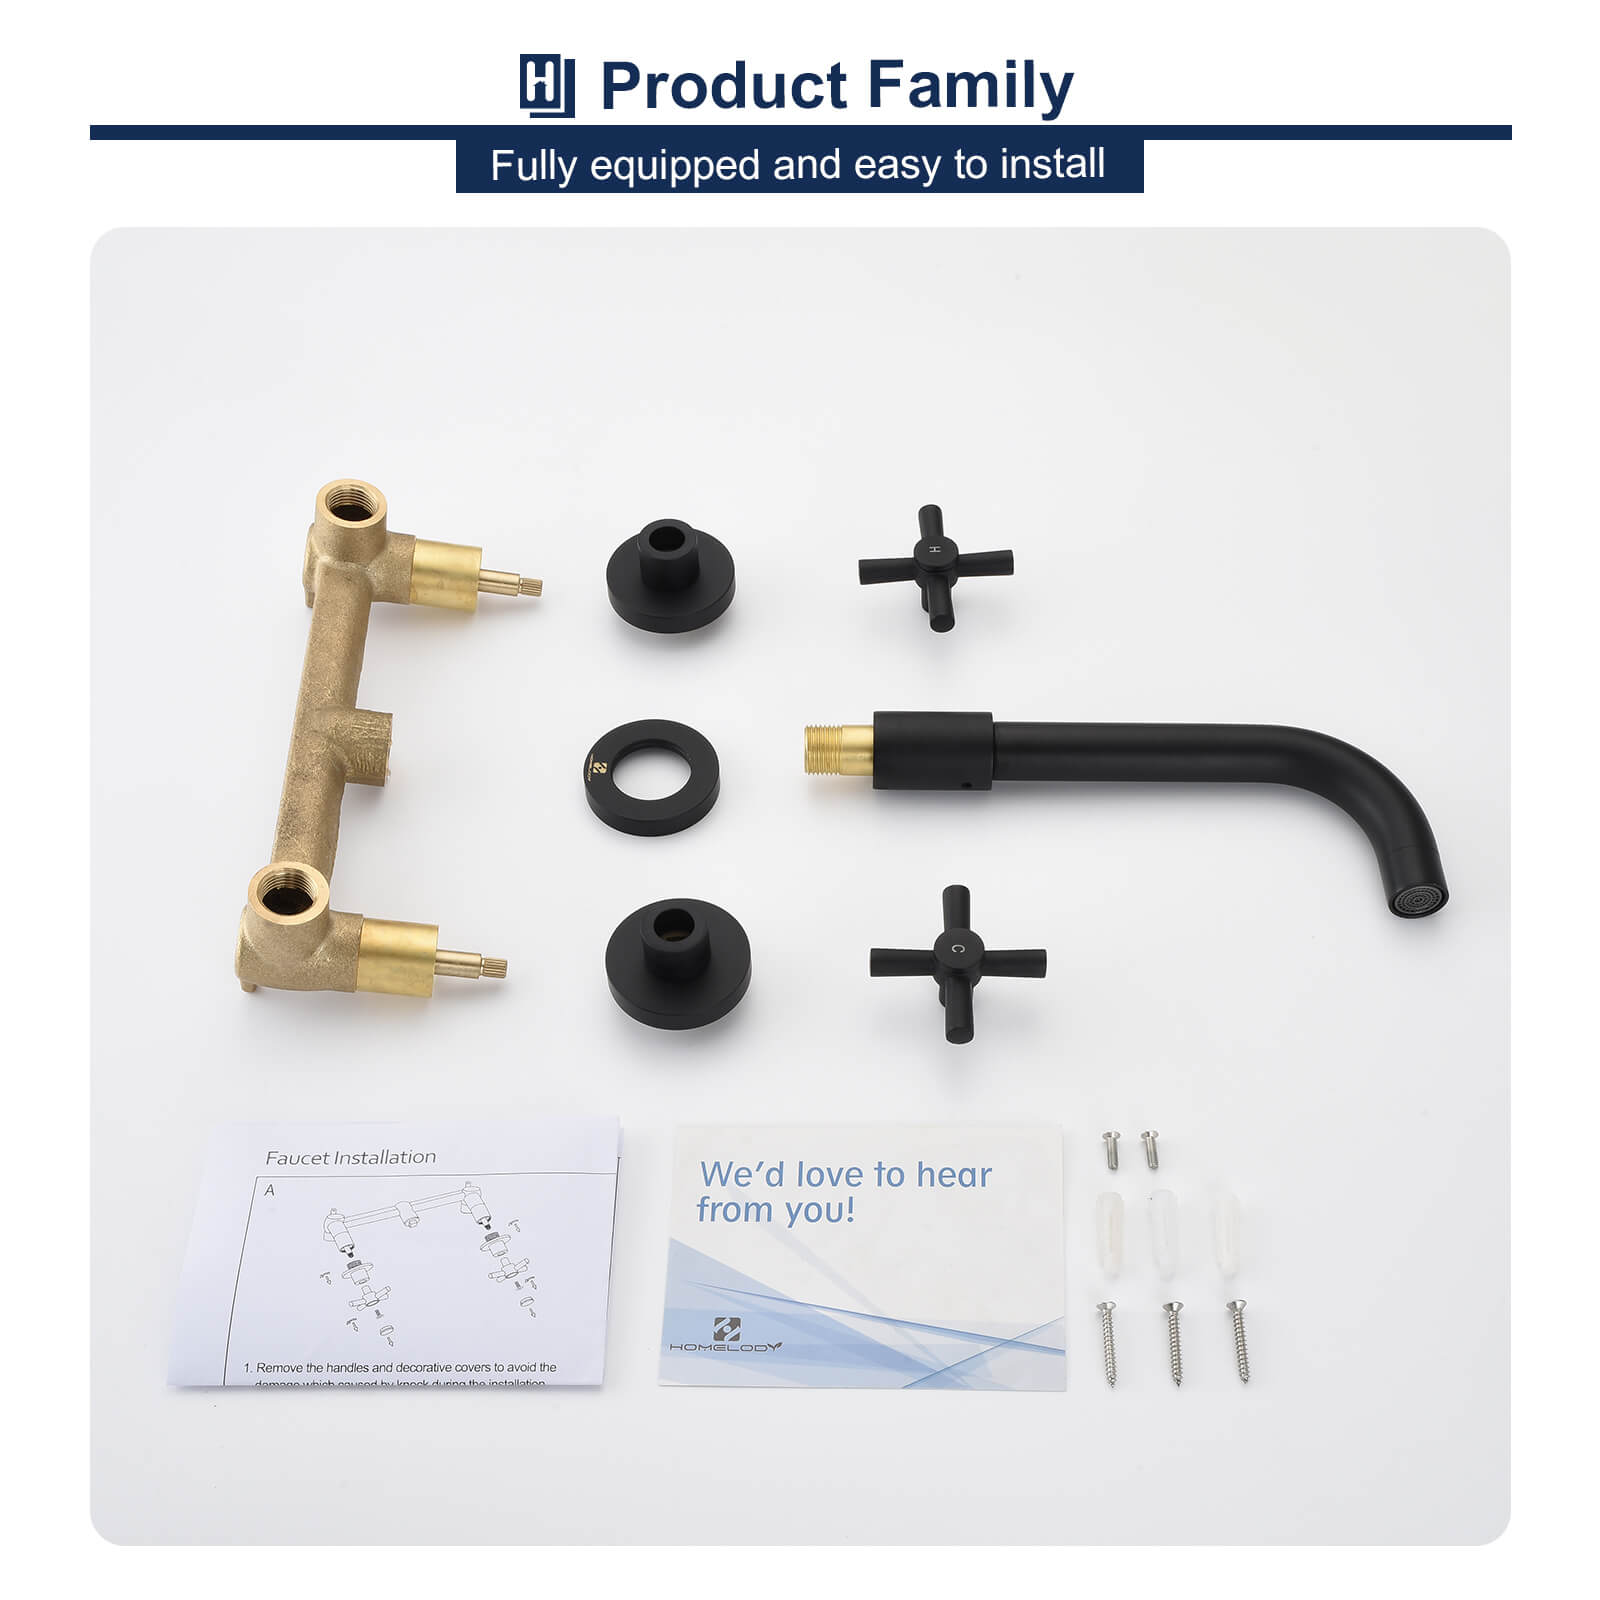 HOMELODY wall-mounted two-handle bathroom faucet (with valve)